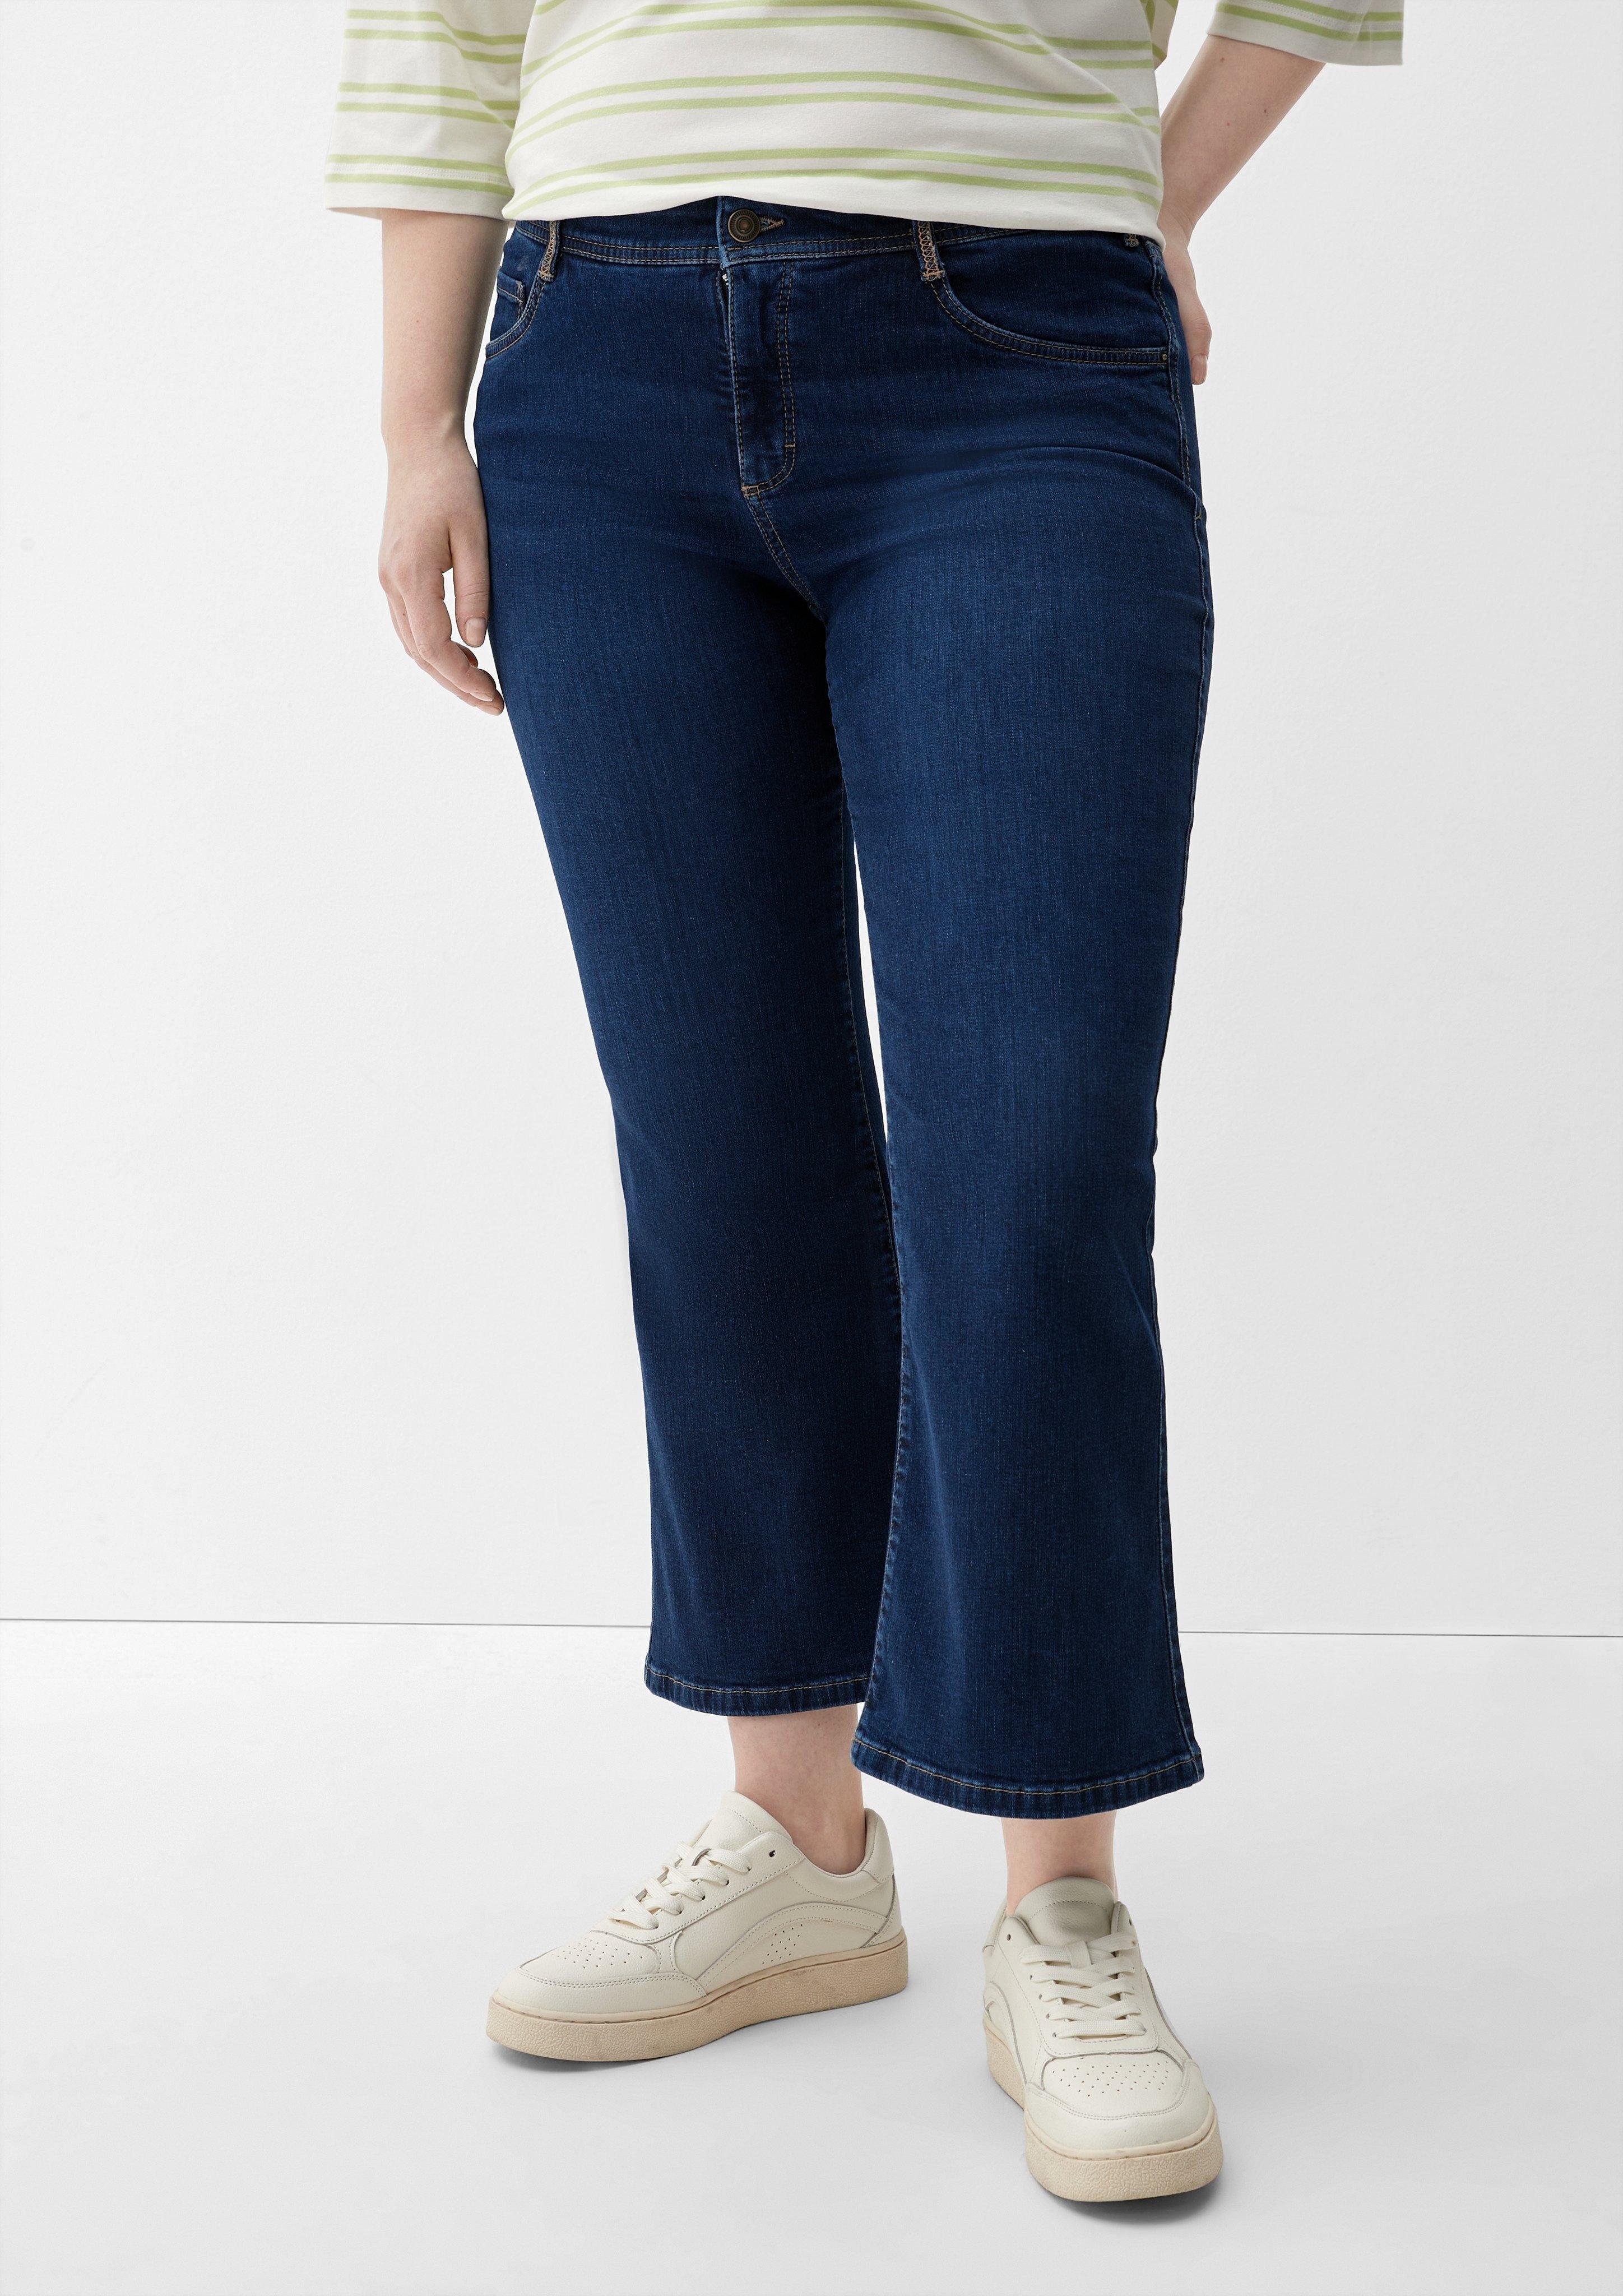 Waschung TRIANGLE Ankle-Jeans Skinny: leg Flared mit Stoffhose